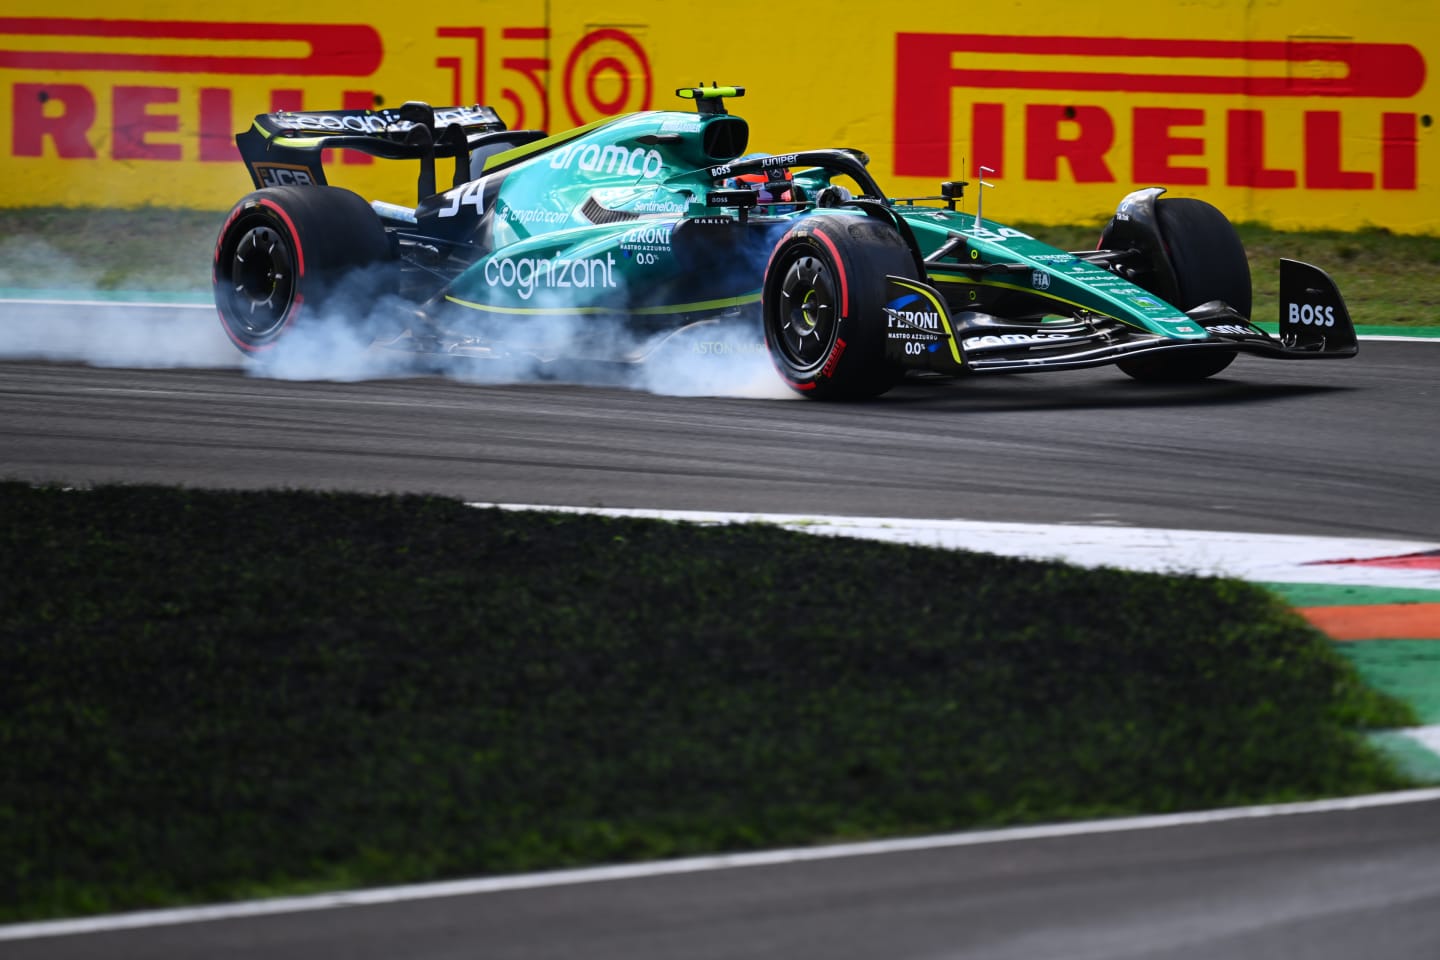 MONZA, ITALY - SEPTEMBER 09: Nyck de Vries Aston Martin AMR22 Mercedes locks a wheel under braking during practice ahead of the F1 Grand Prix of Italy at Autodromo Nazionale Monza on September 09, 2022 in Monza, Italy. (Photo by Clive Mason/Getty Images)